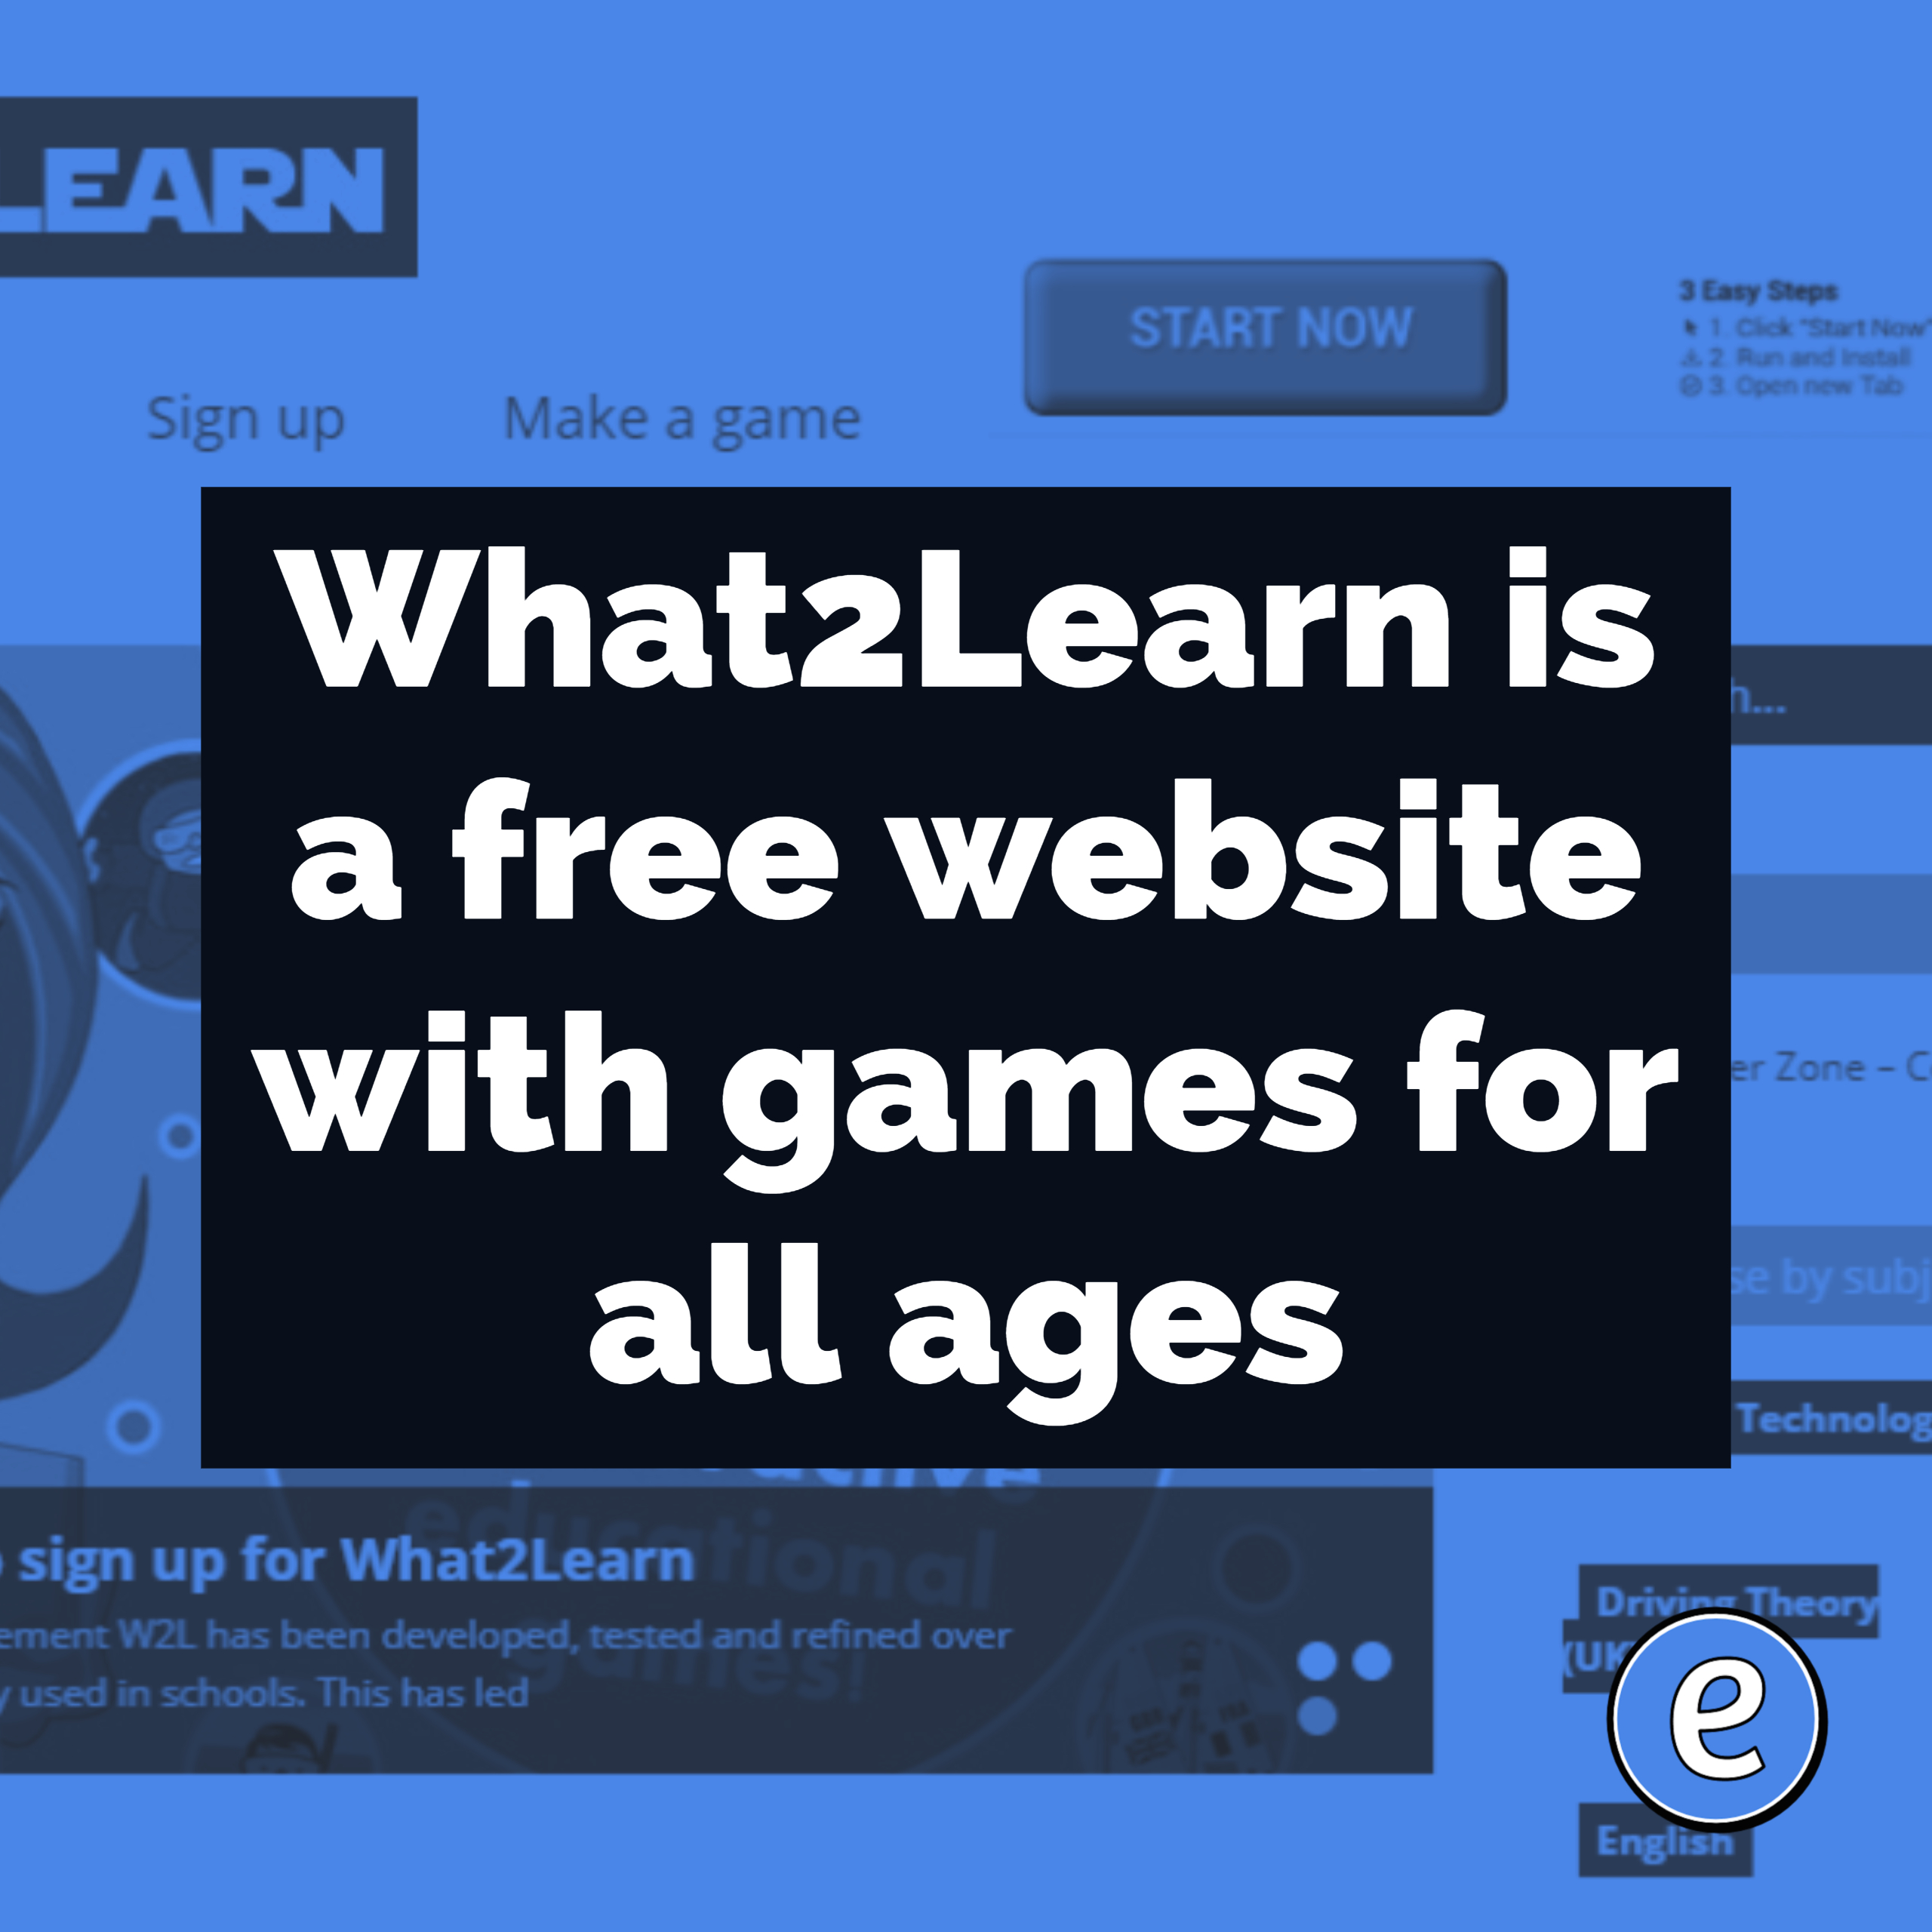 What2Learn is a free website with games for all ages